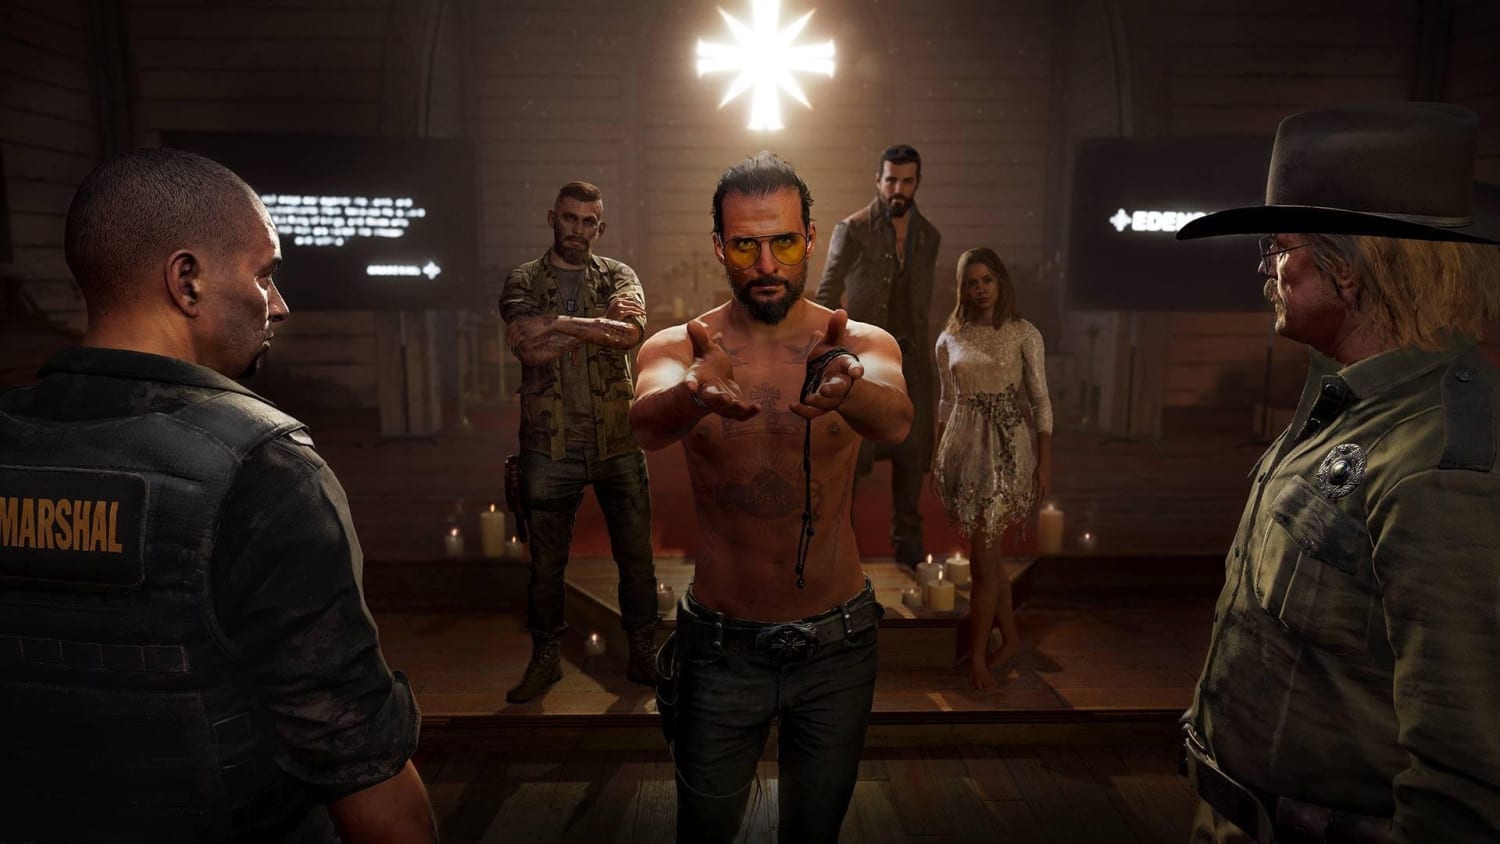 Far Cry 5 - Hours of Darkness Review - Saving Content